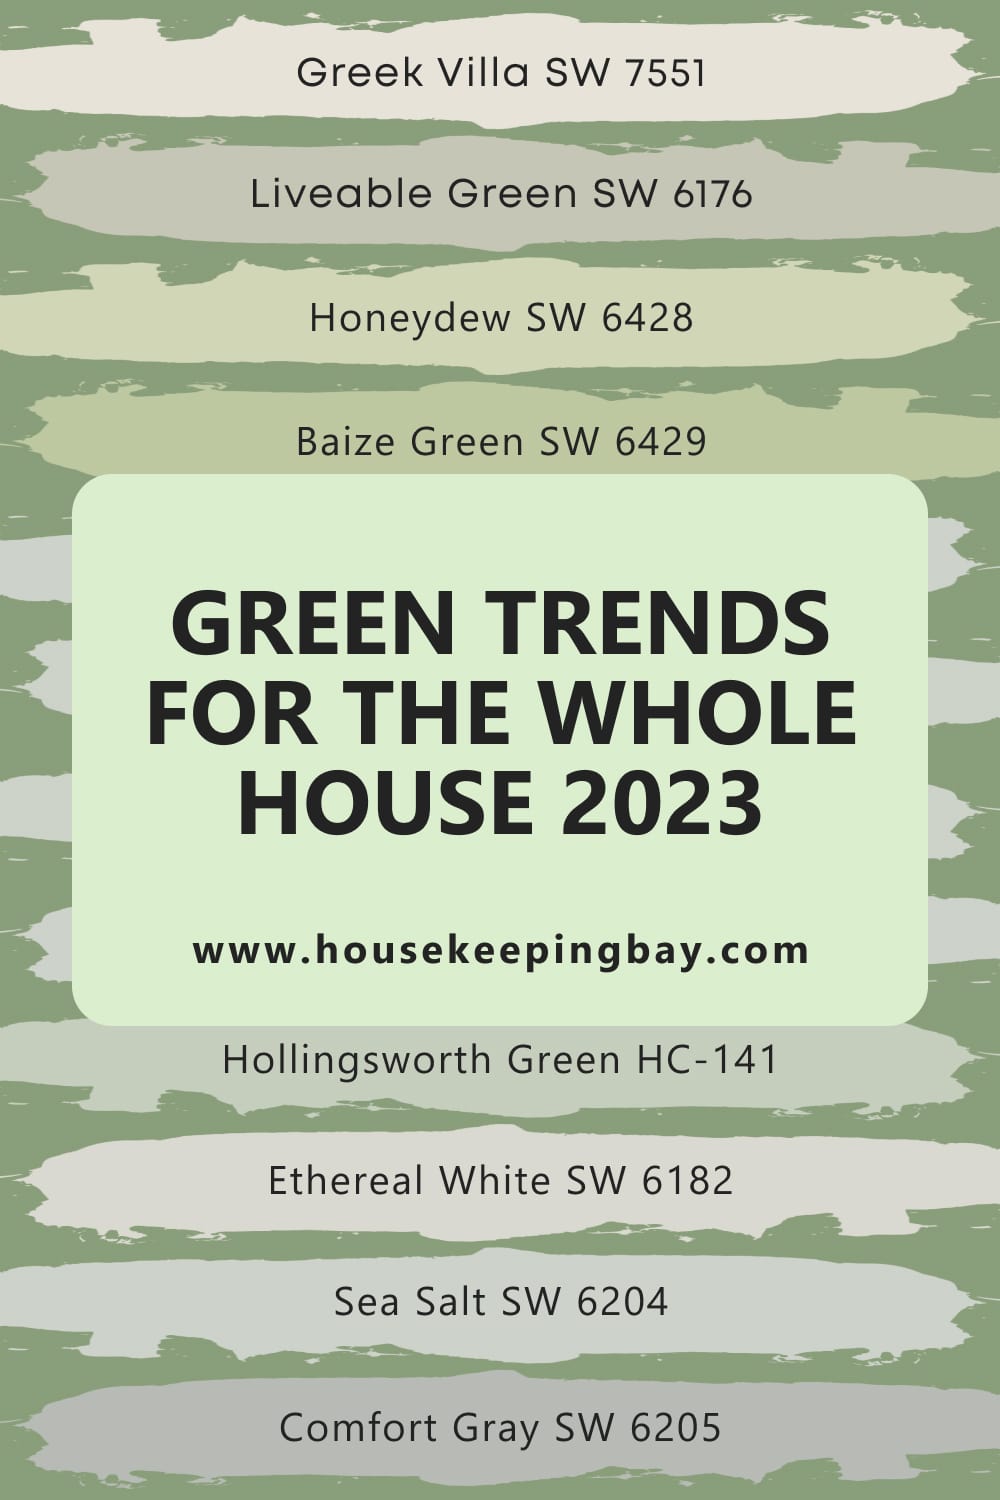 Green trends for the whole house 2023